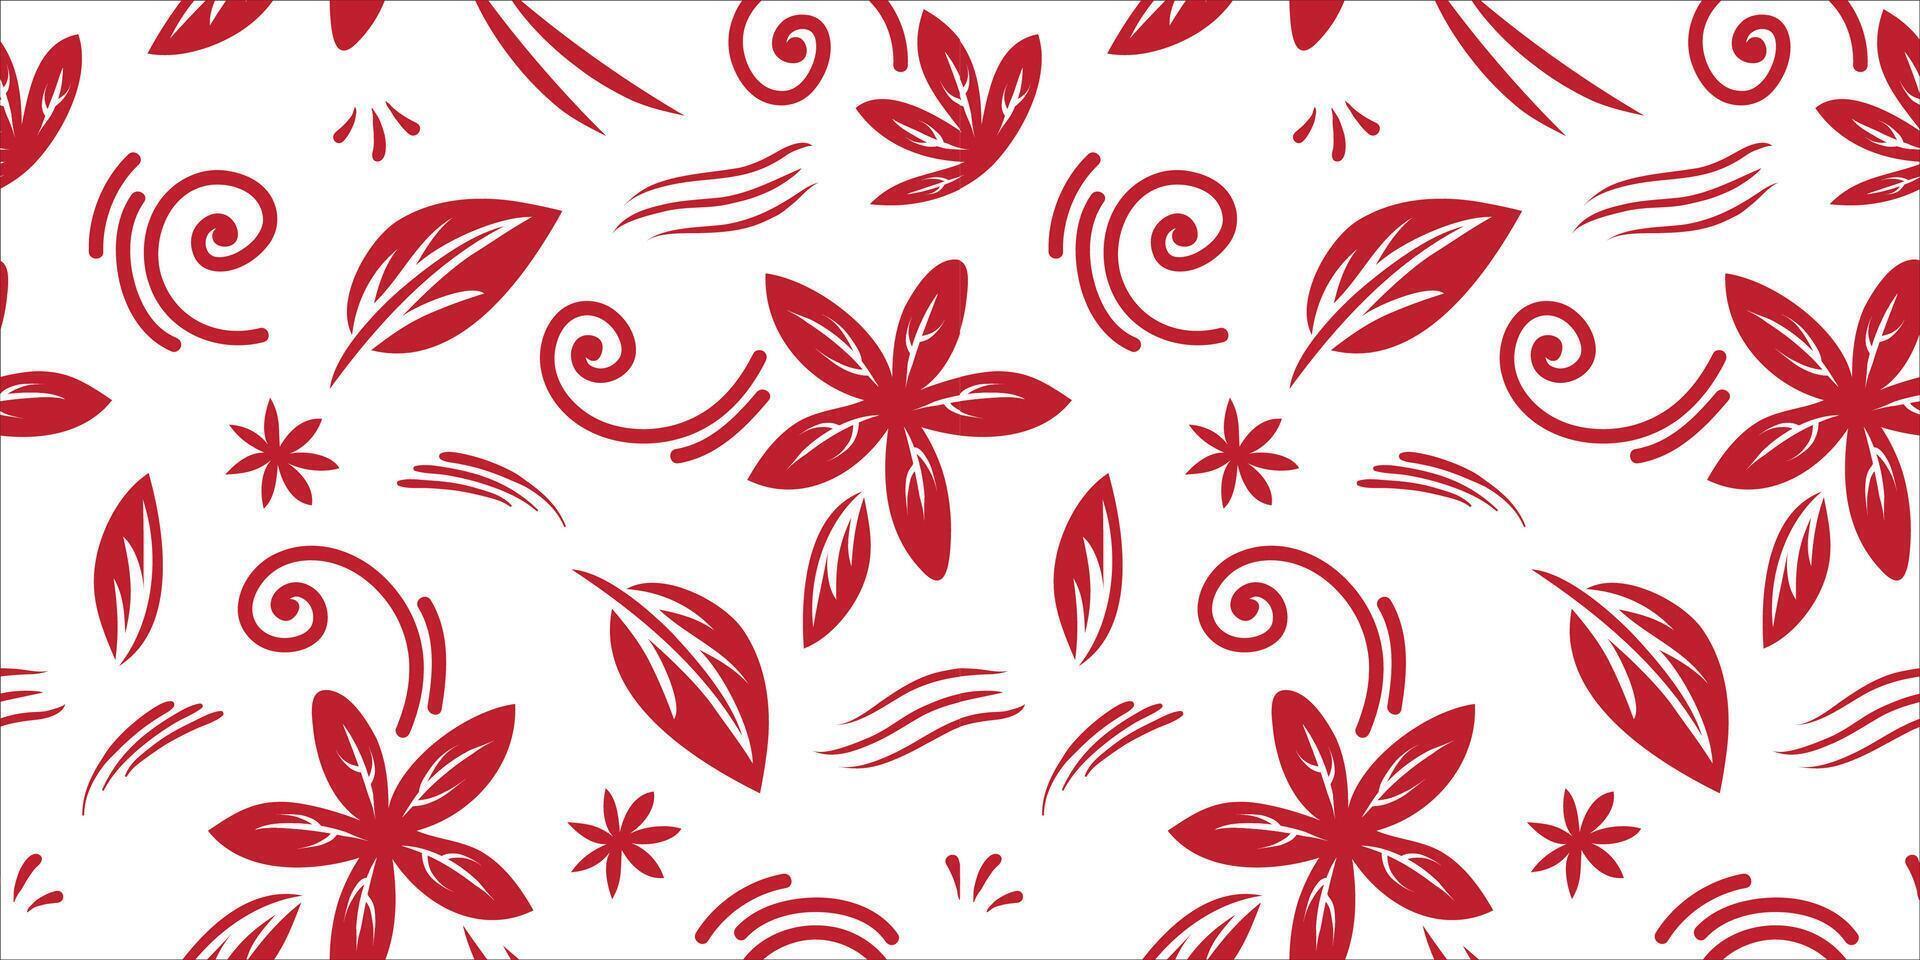 Big flowers pattern, upscale floral pattern. graphical textures floral, trendy colors pattern , flowers background with leaves.. vector